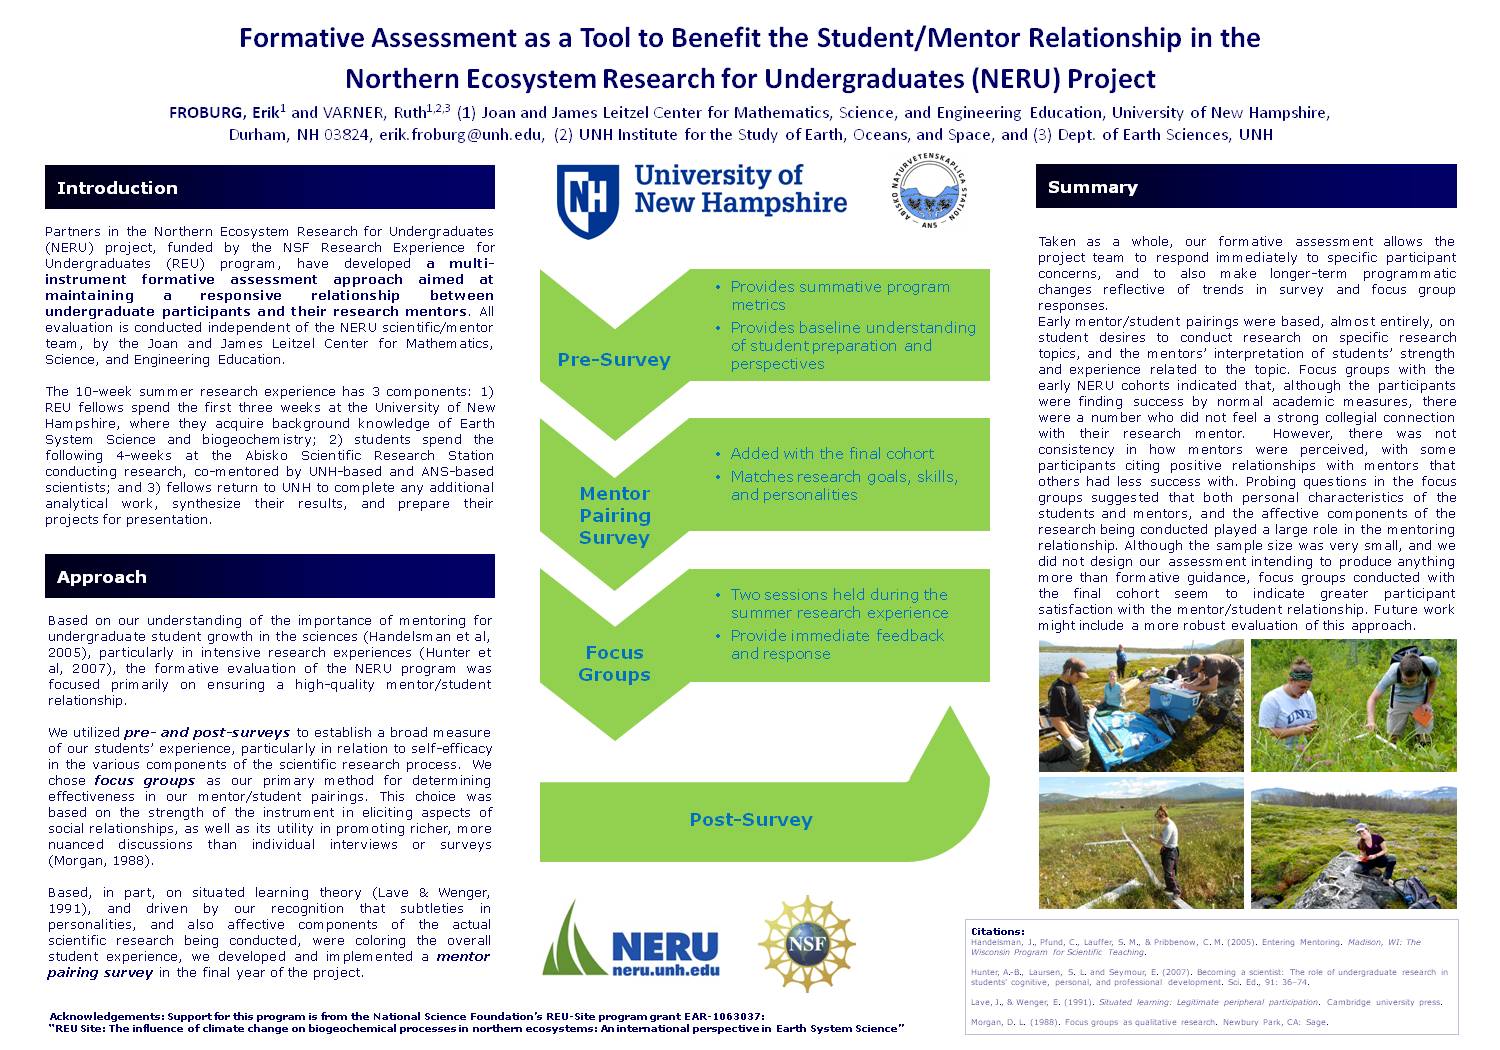 Formative Assessment As A Tool To Benefit The Student/Mentor Relationship In The  Northern Ecosystem Research For Undergraduates (Neru) Project by efroburg